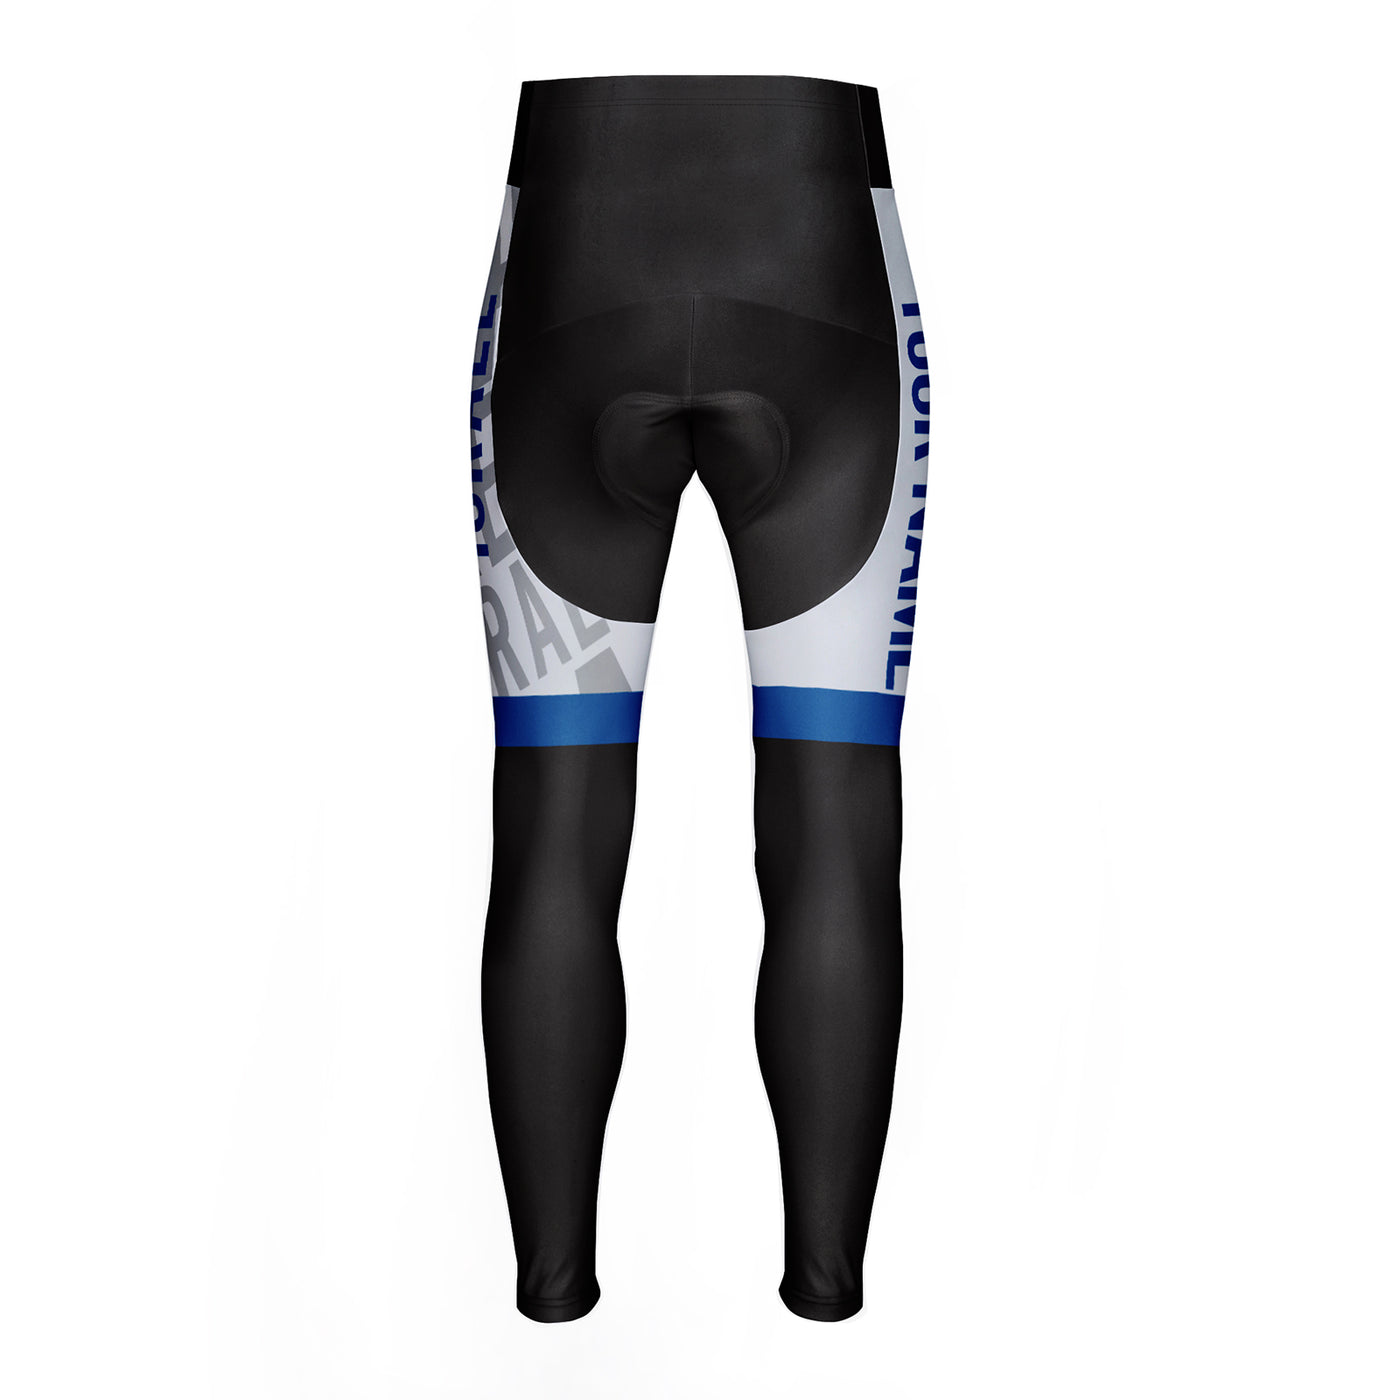 Customized Israel Unisex Cycling Tights Long Pants